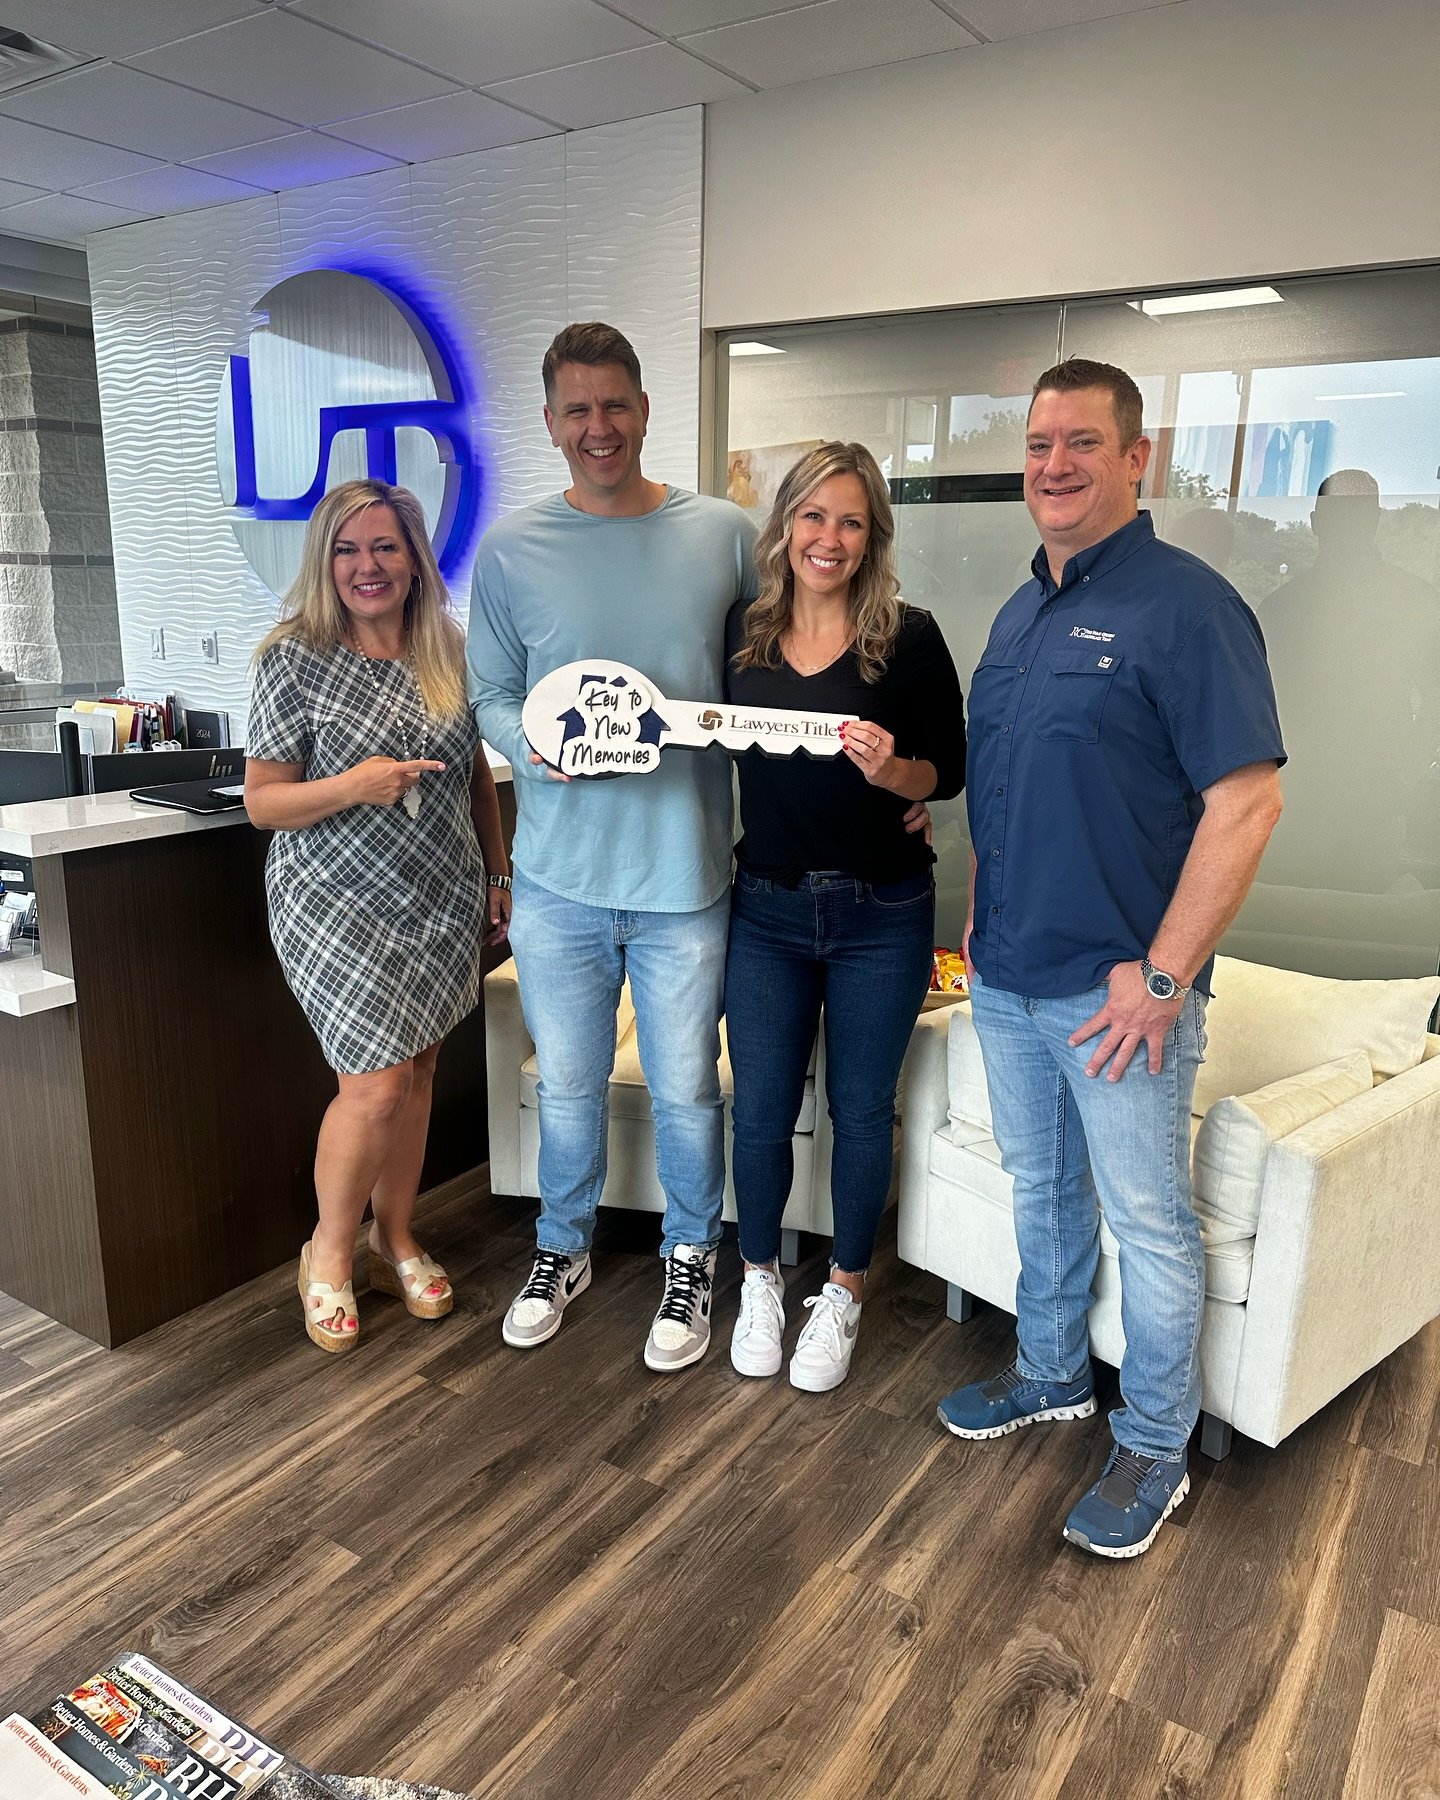 Happy Closing Day to this fabulous couple! 
Andy and Lacey you were absolutely great to work with. I hope you enjoy your beautiful home in Carrollton.

Shout out to Ryan Grubbs for getting everything cleared to close so quickly and the appraisal done